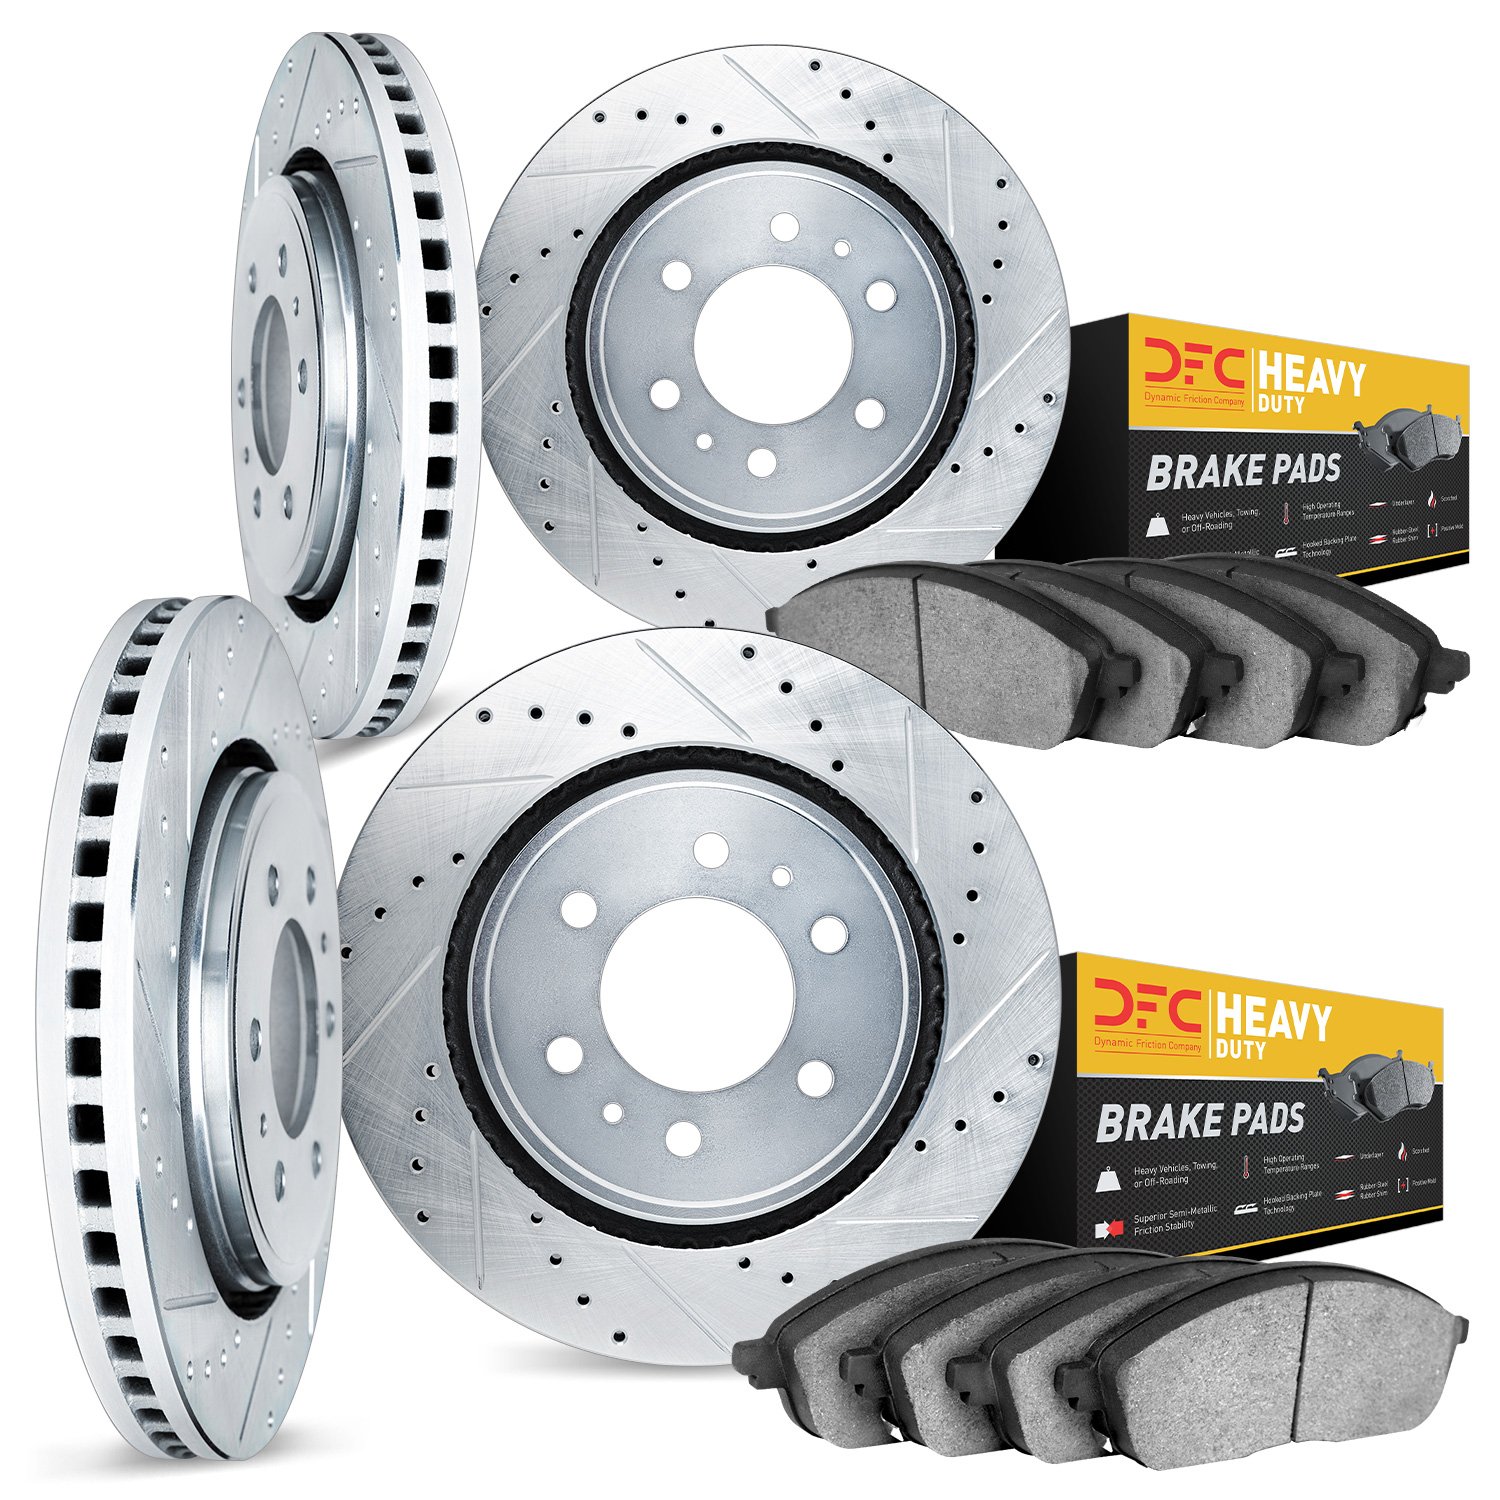 7204-48066 Drilled/Slotted Rotors w/Heavy-Duty Brake Pads Kit [Silver], 2000-2006 GM, Position: Front and Rear